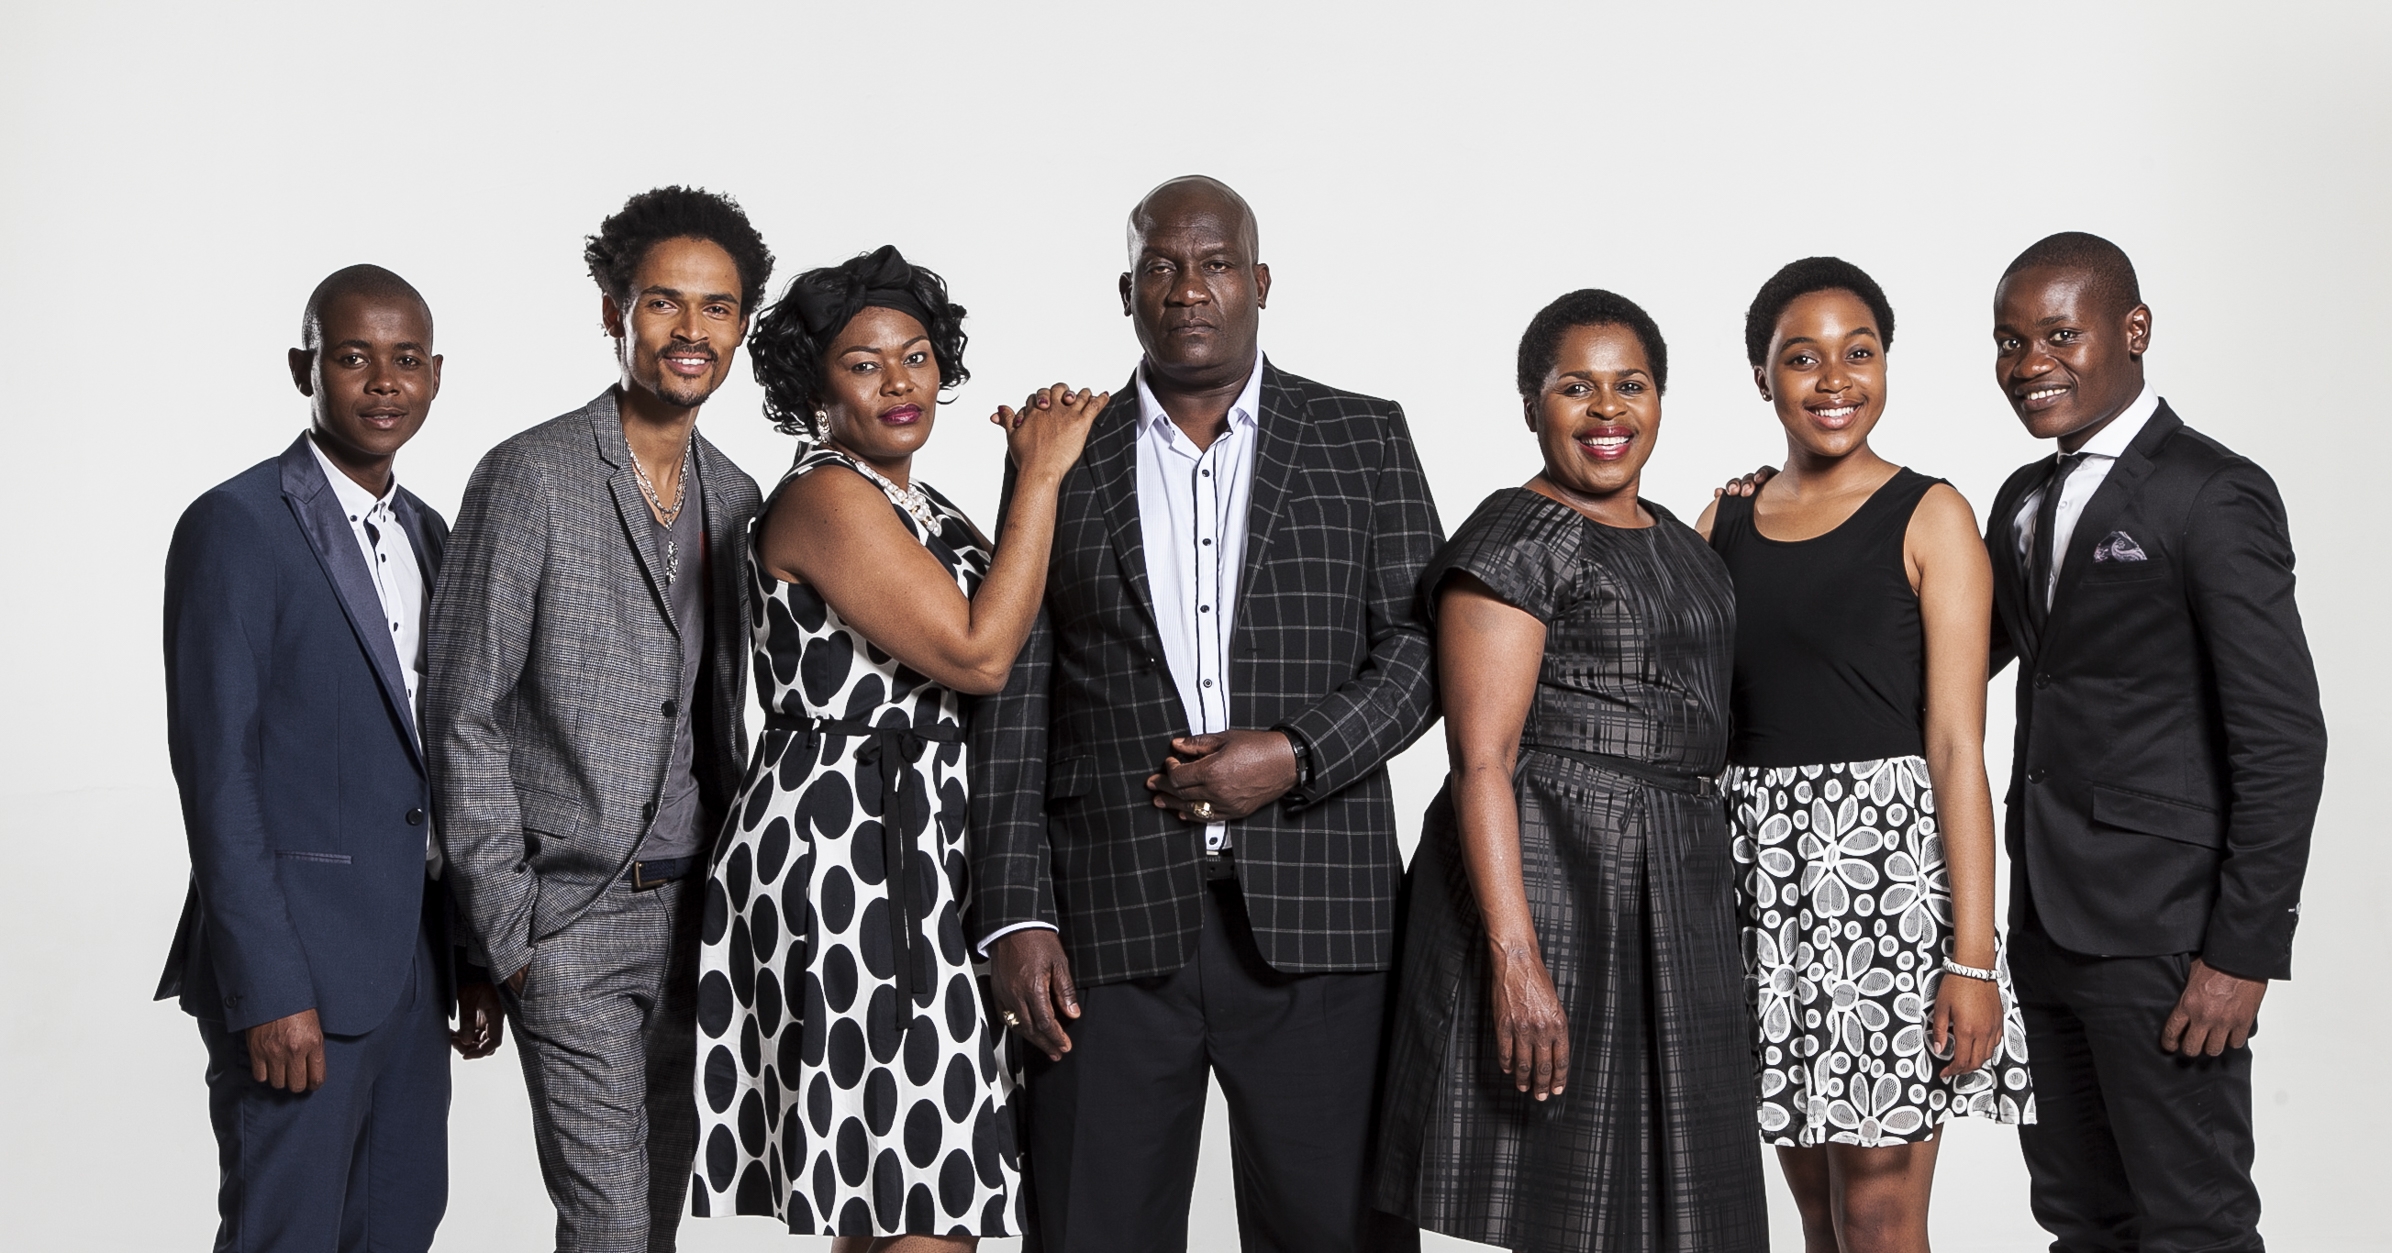 Breaking News: Exclusive Interview with SKEEM SAAM Biggest Star – You Won’t Believe What They Revealed